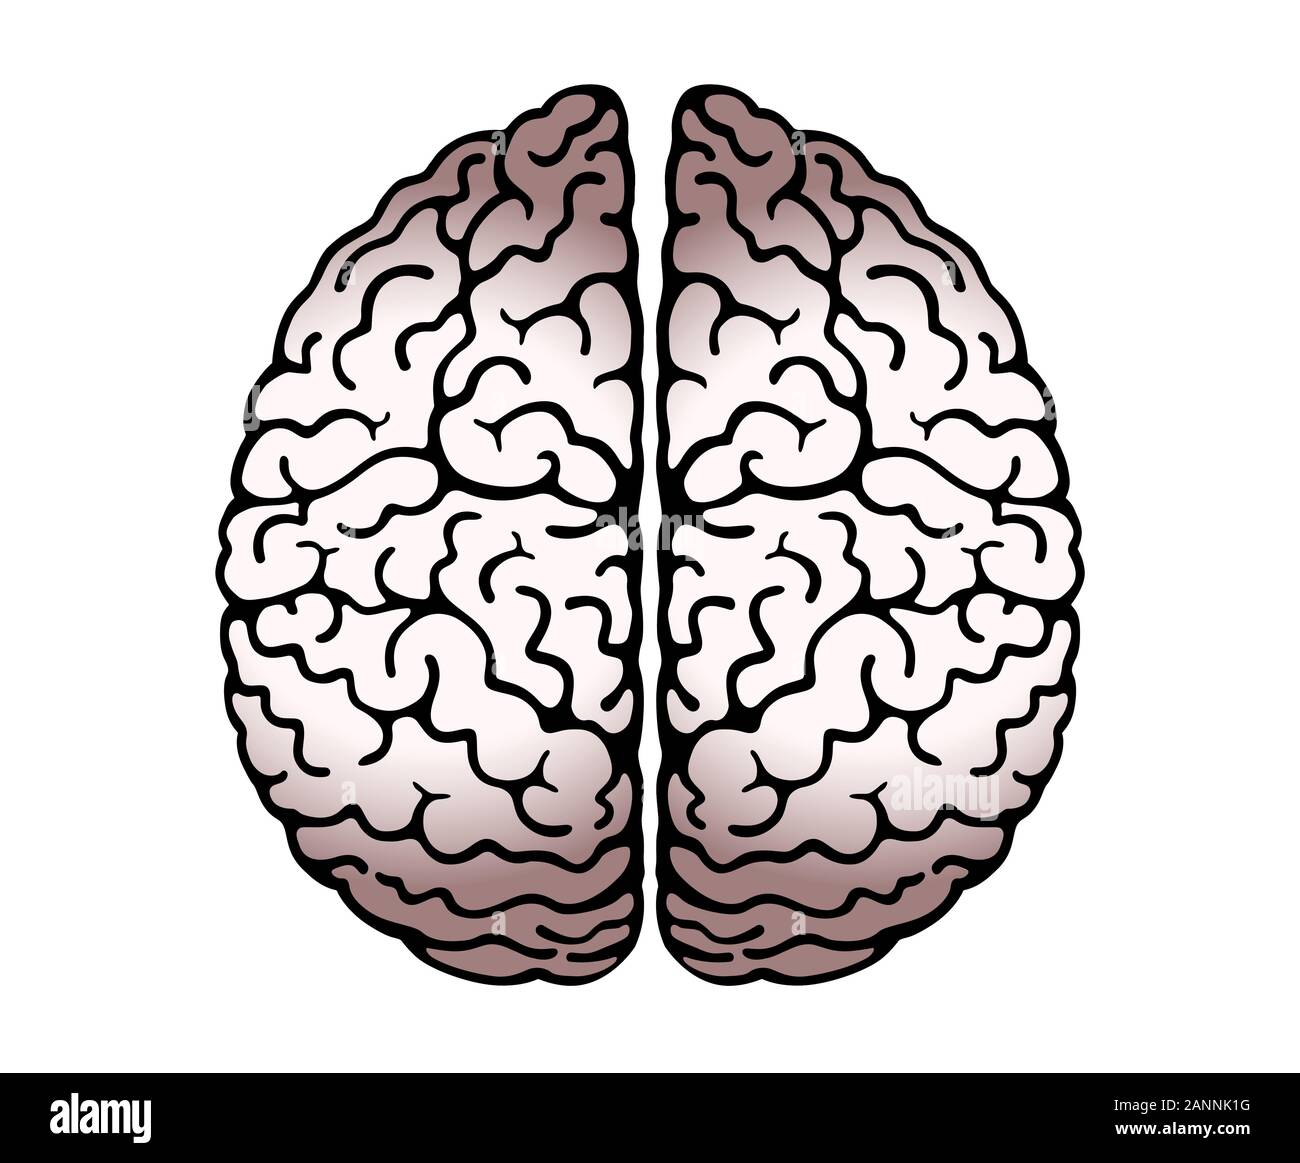 Vector Outline Illustration Of Human Brain On White Background. Cerebral Hemispheres,  Convolutions Of The Mind Brain, Brain's Bends. View From Above, Stock Vector